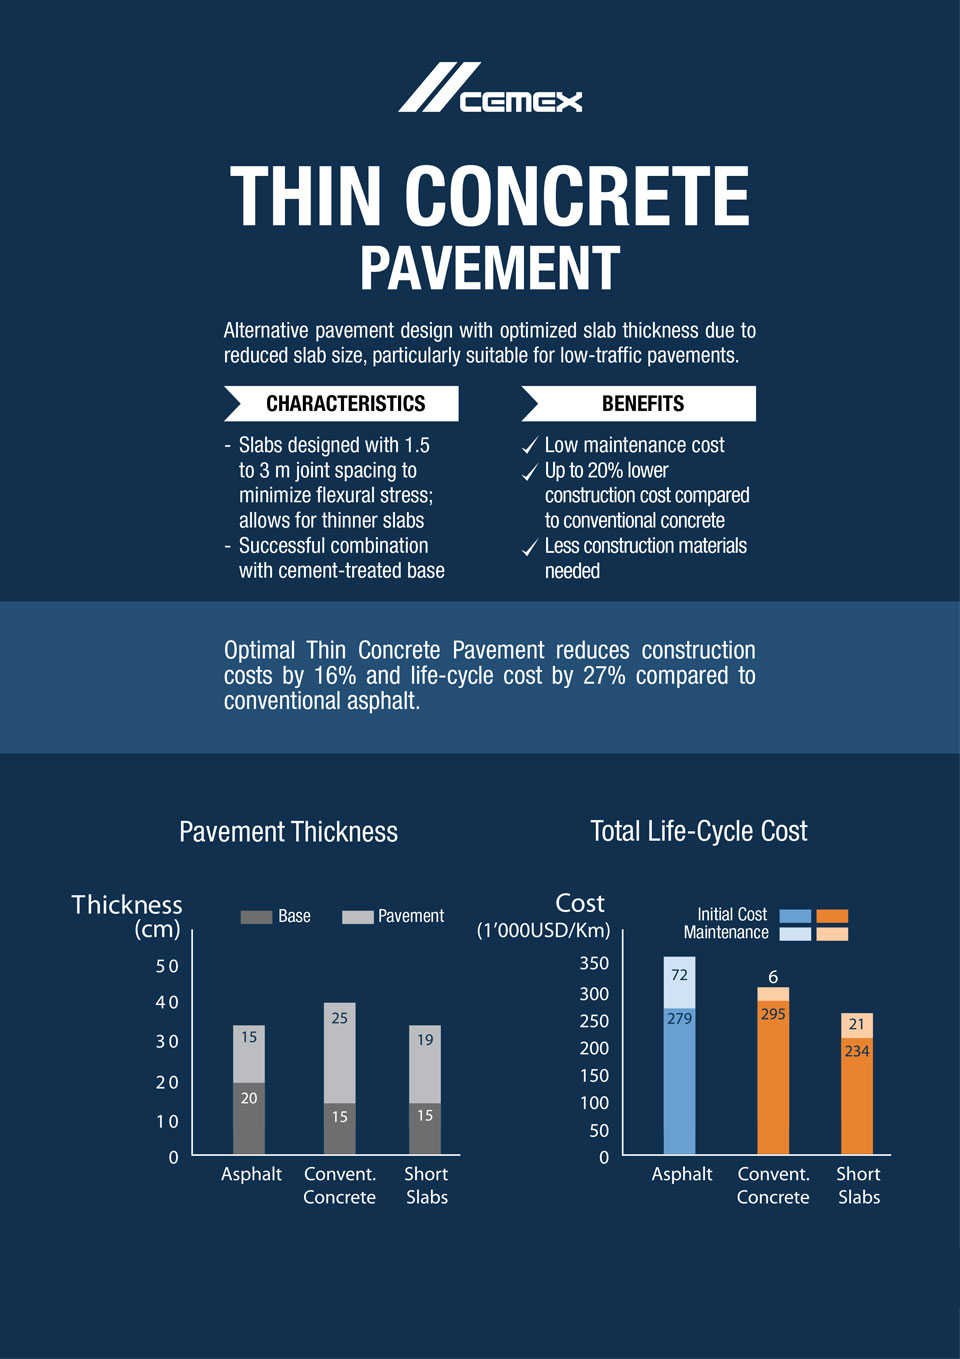 the image shows some characteristics and benefits of thin concrete pavement